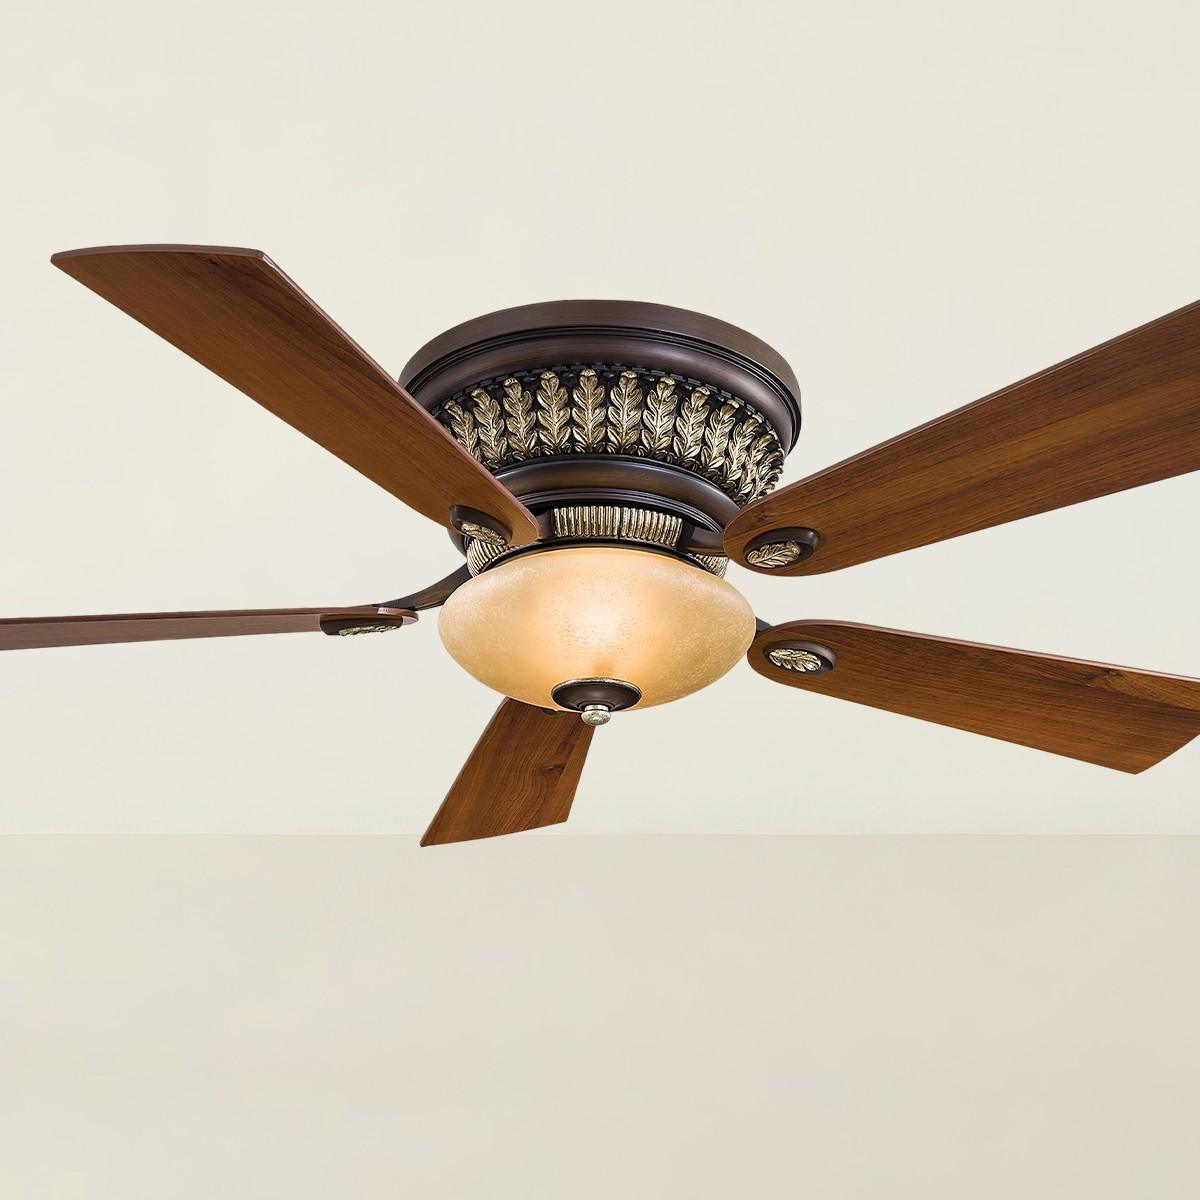 Calais 52 Inch Ceiling Fan With Light And Remote, Belcaro Walnut Finish - Bees Lighting